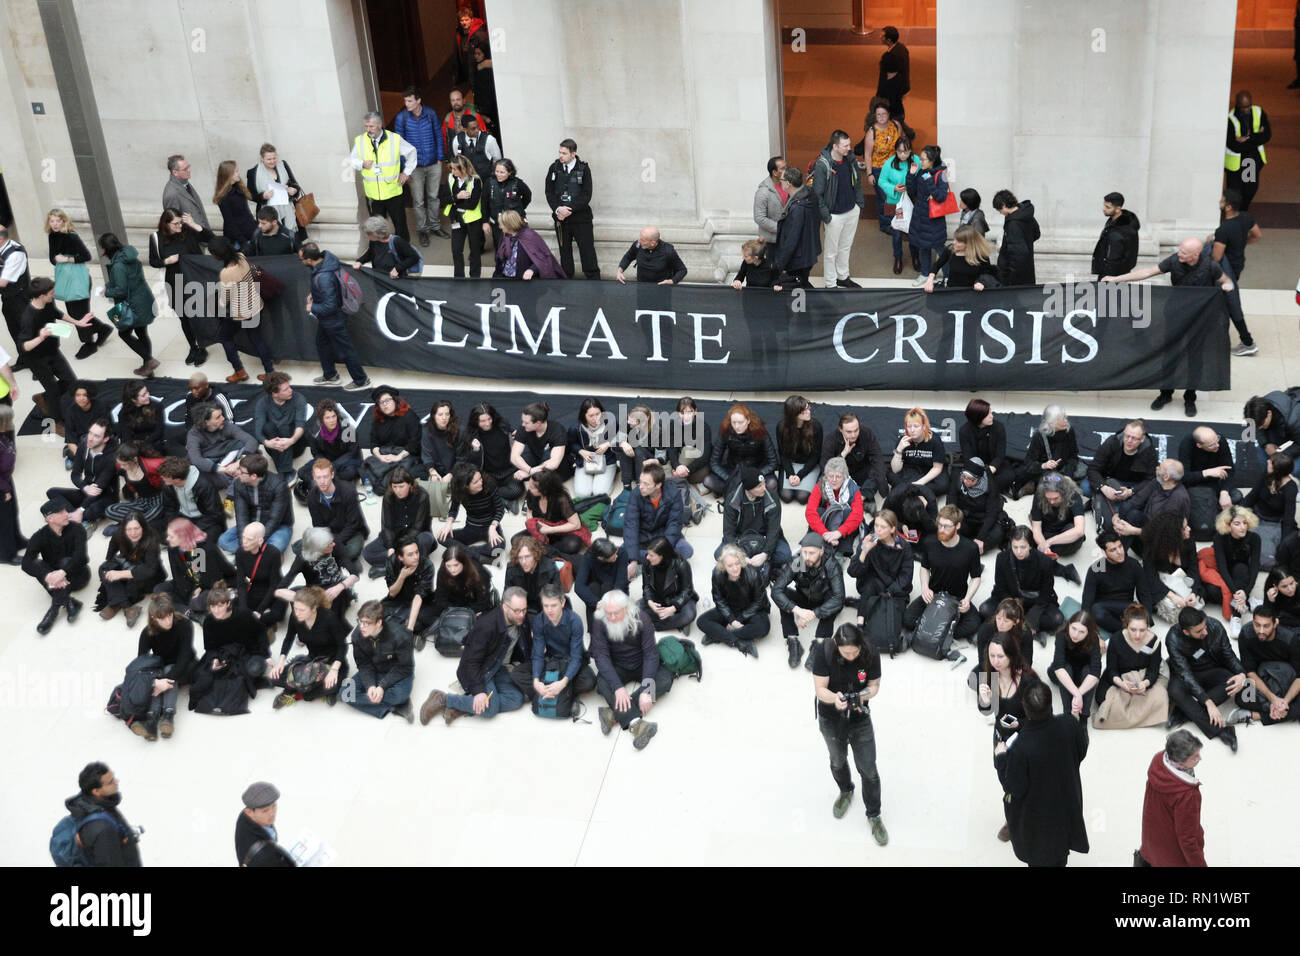 British Museum, London, UK, 16th Feb 2019. 'BP or Not  BP - No War No Warming' protest. Hundreds of protesters from 'BP or Not BP' have formed human chains with messages and later stage a sit in to protest against BP sponsoring the exhibition ' I am Ashurbanipal' at the museum. Protesters rally both within the British Museum Great Hall and outside the exhibition entrance. Stock Photo